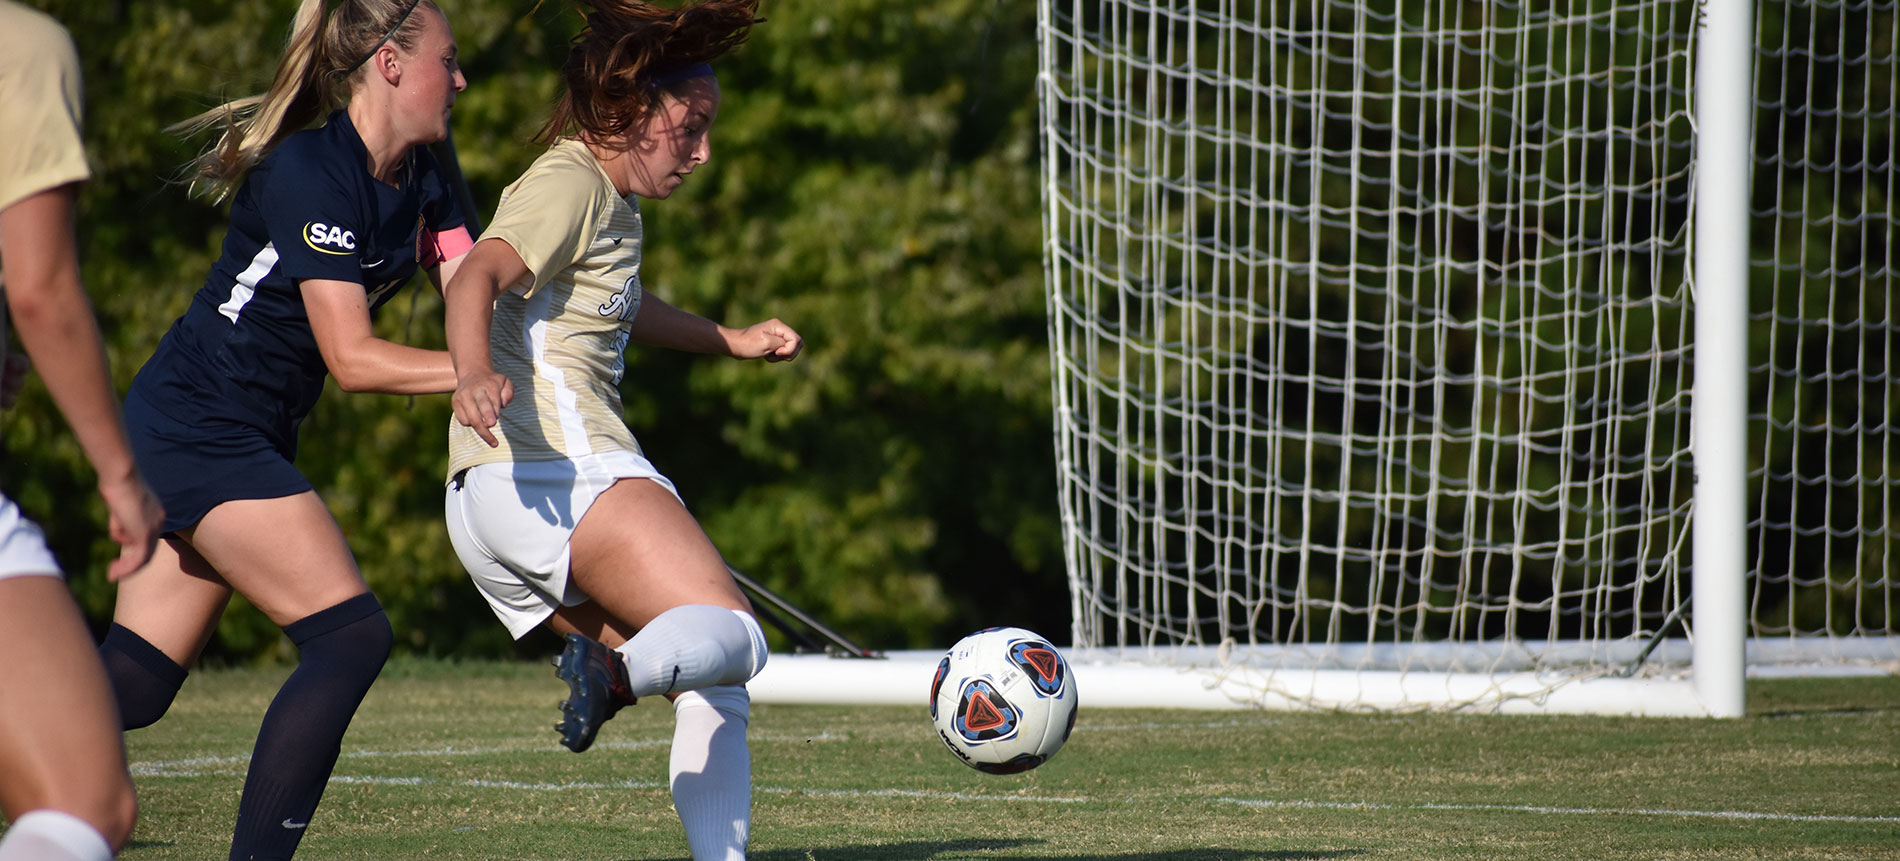 Women’s Soccer Wins Road Contest at Mars Hill; 2-1